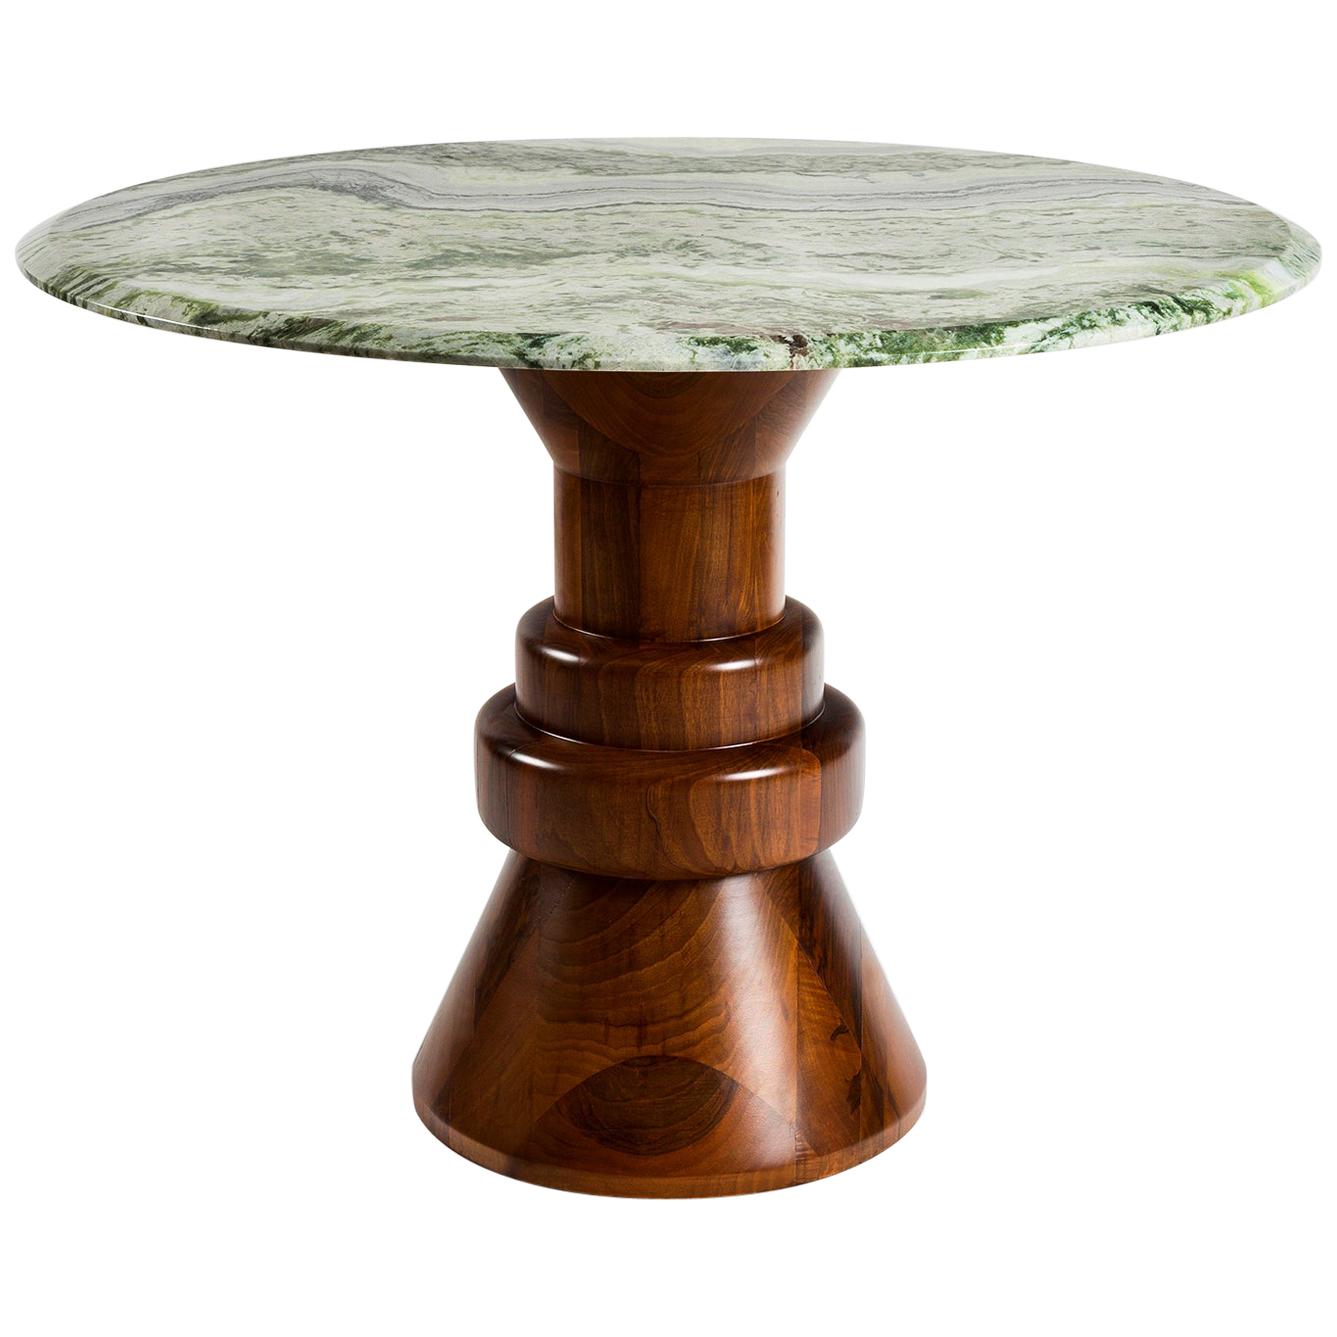 21st Century Green Marble Round Dining Table with Sculptural Wooden Base